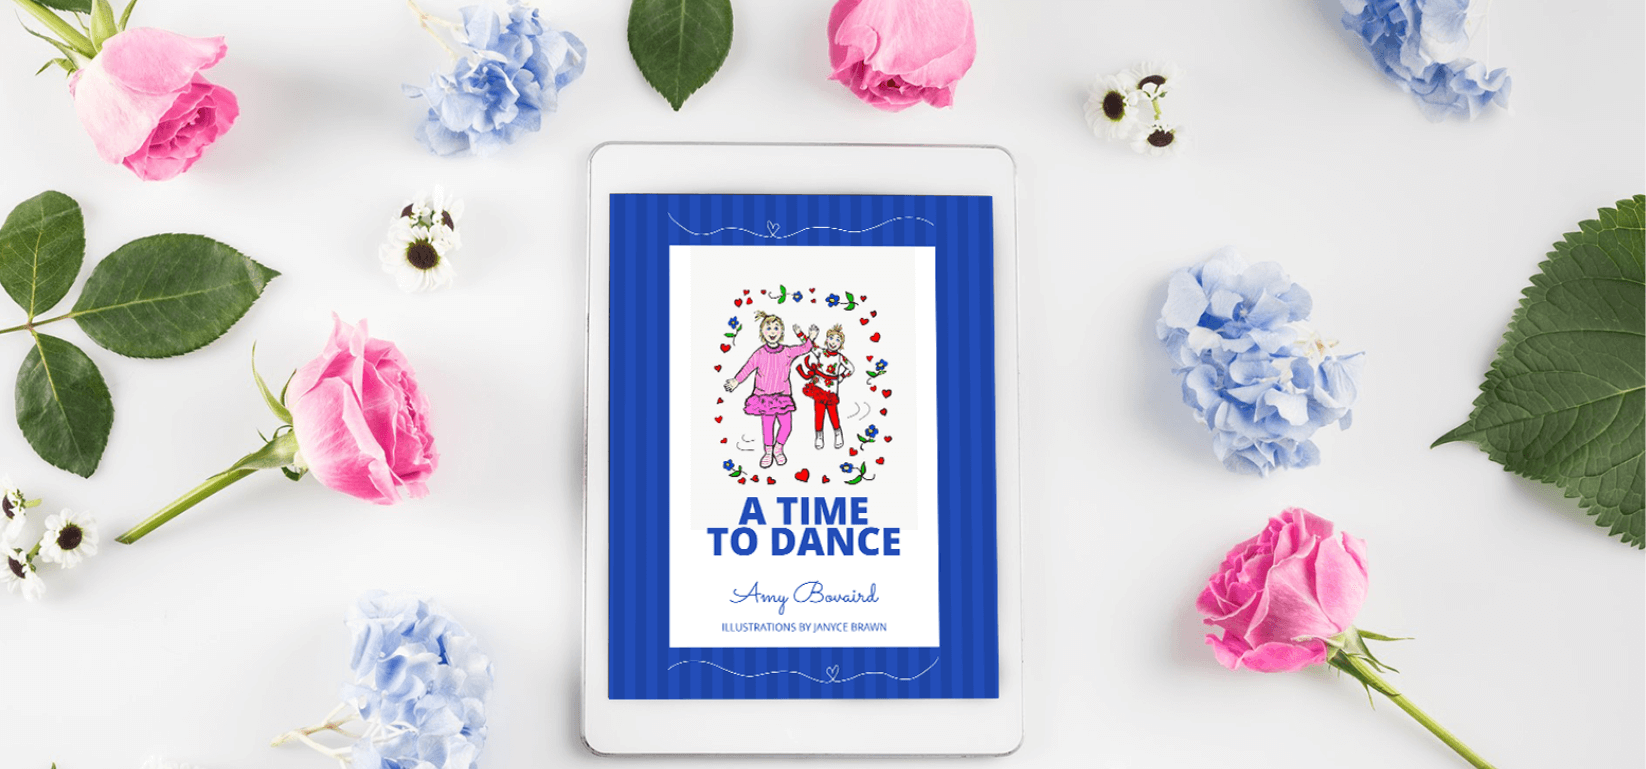 A Time to Dance Featured image of the book cover on a tablet surrounded by beautiful pink and blue flowers